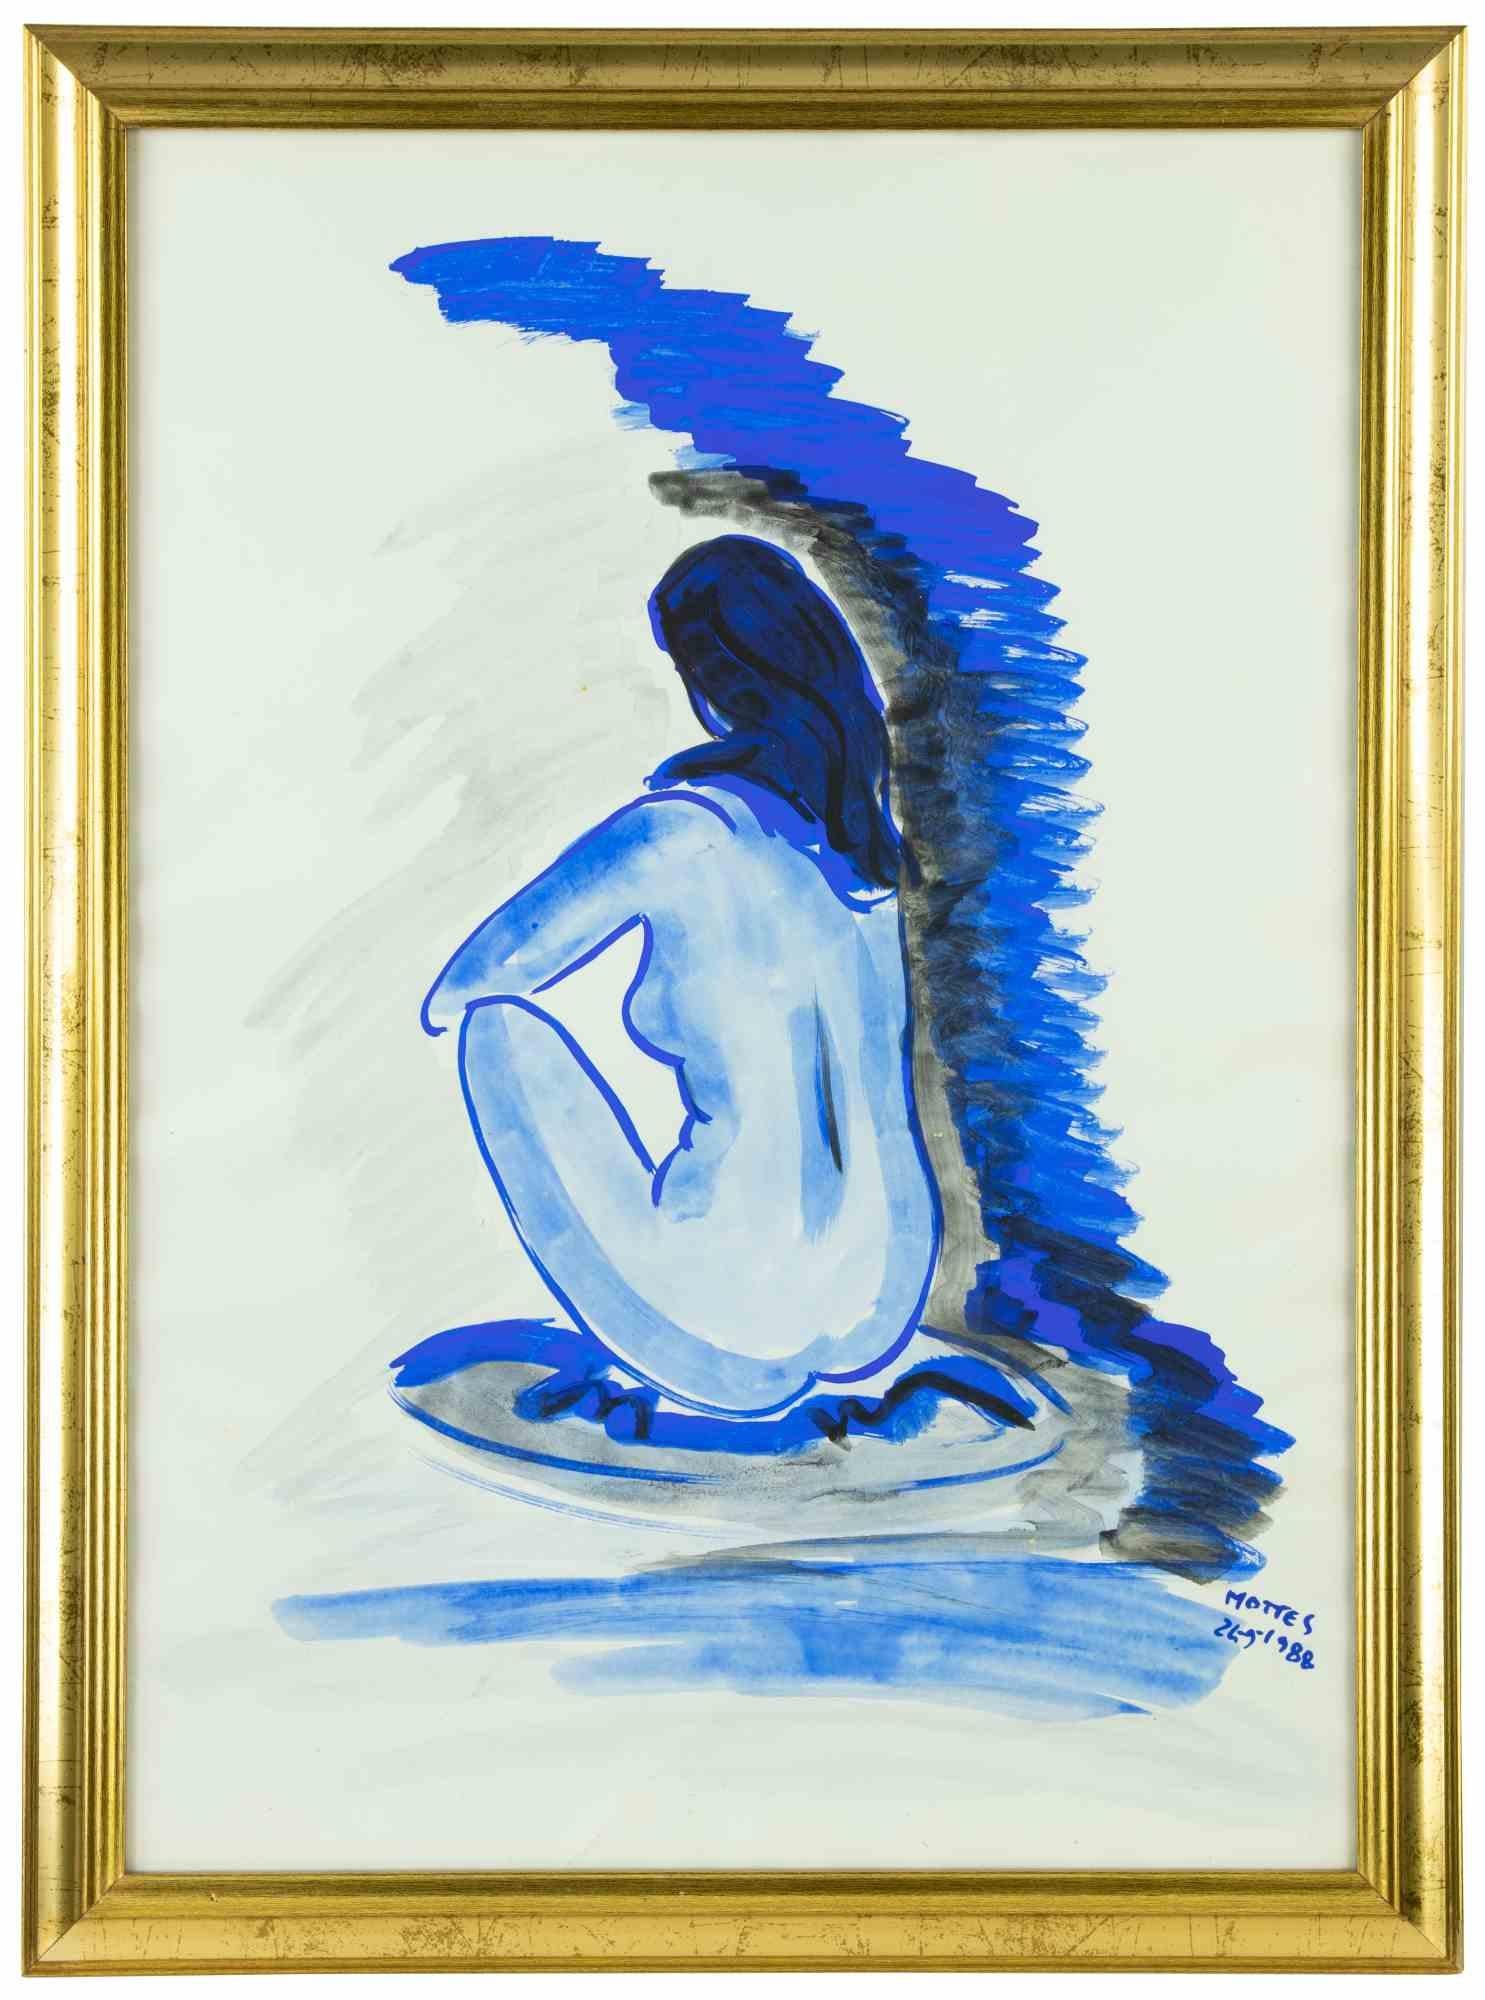 Nude from the Back is an artwork realized by Grazia Mottes in 1988.

Mixed Media on Cardboard. 

78 x 58 cm.

Handsigned and dated in the lower part.

Good conditions!